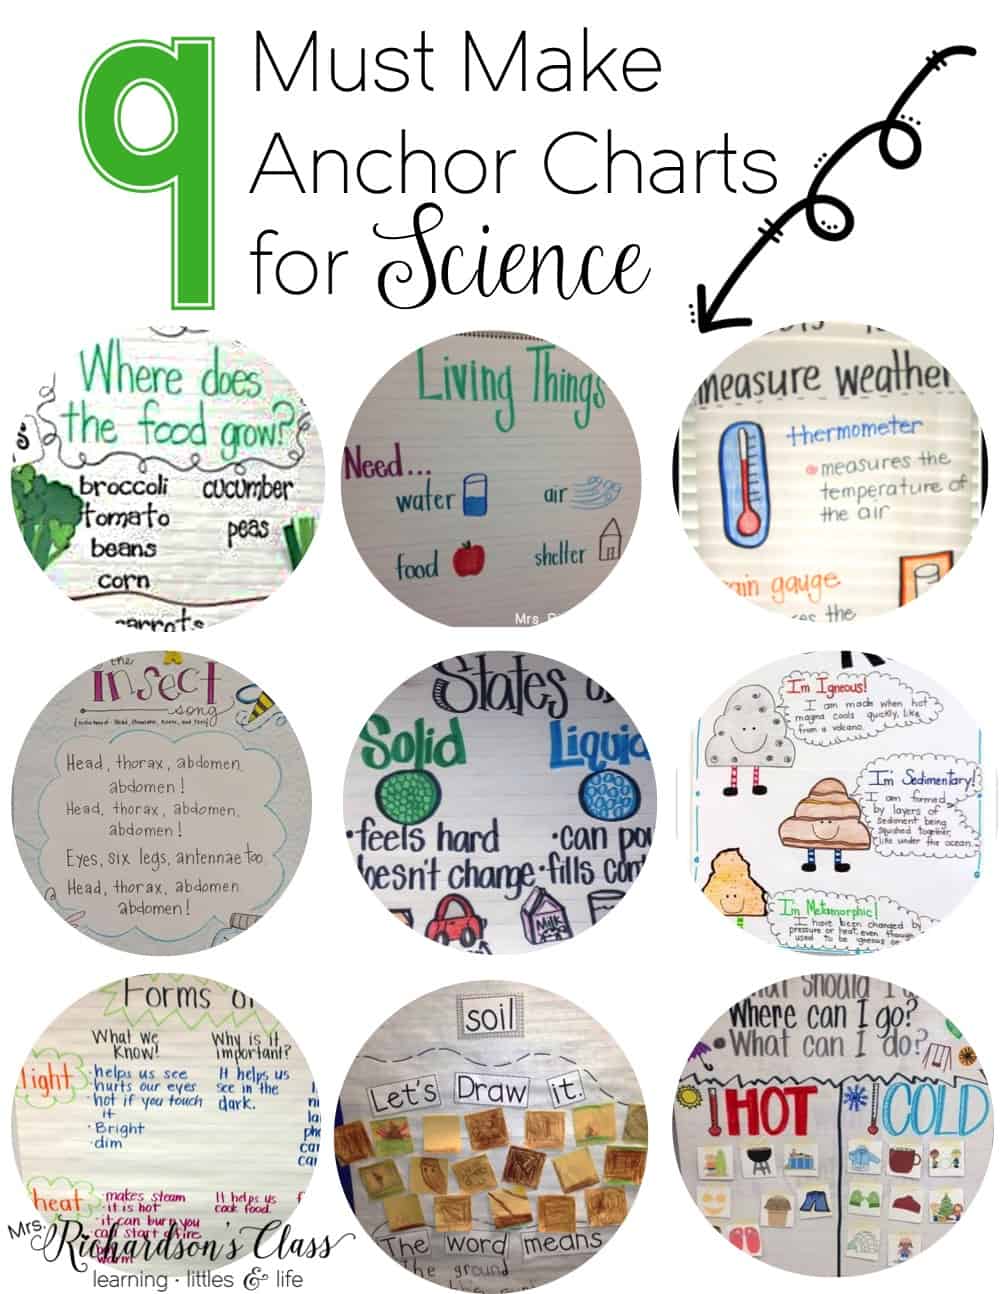 9 Must Make Anchor Charts for Science Mrs. Richardson's Class